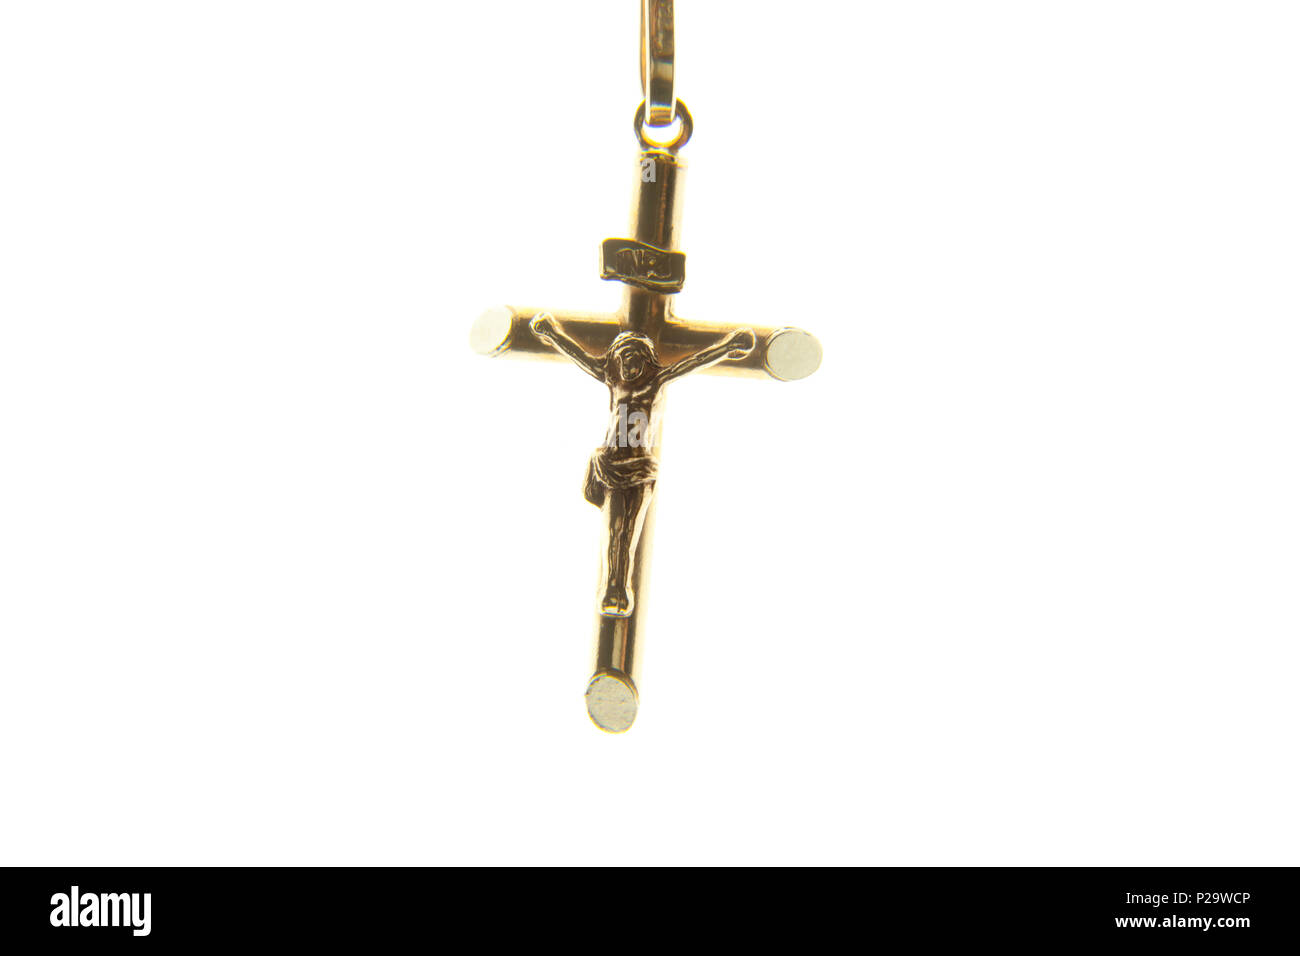 A jewel representing Jesus Christ on the cross, isolated on white background. Stock Photo